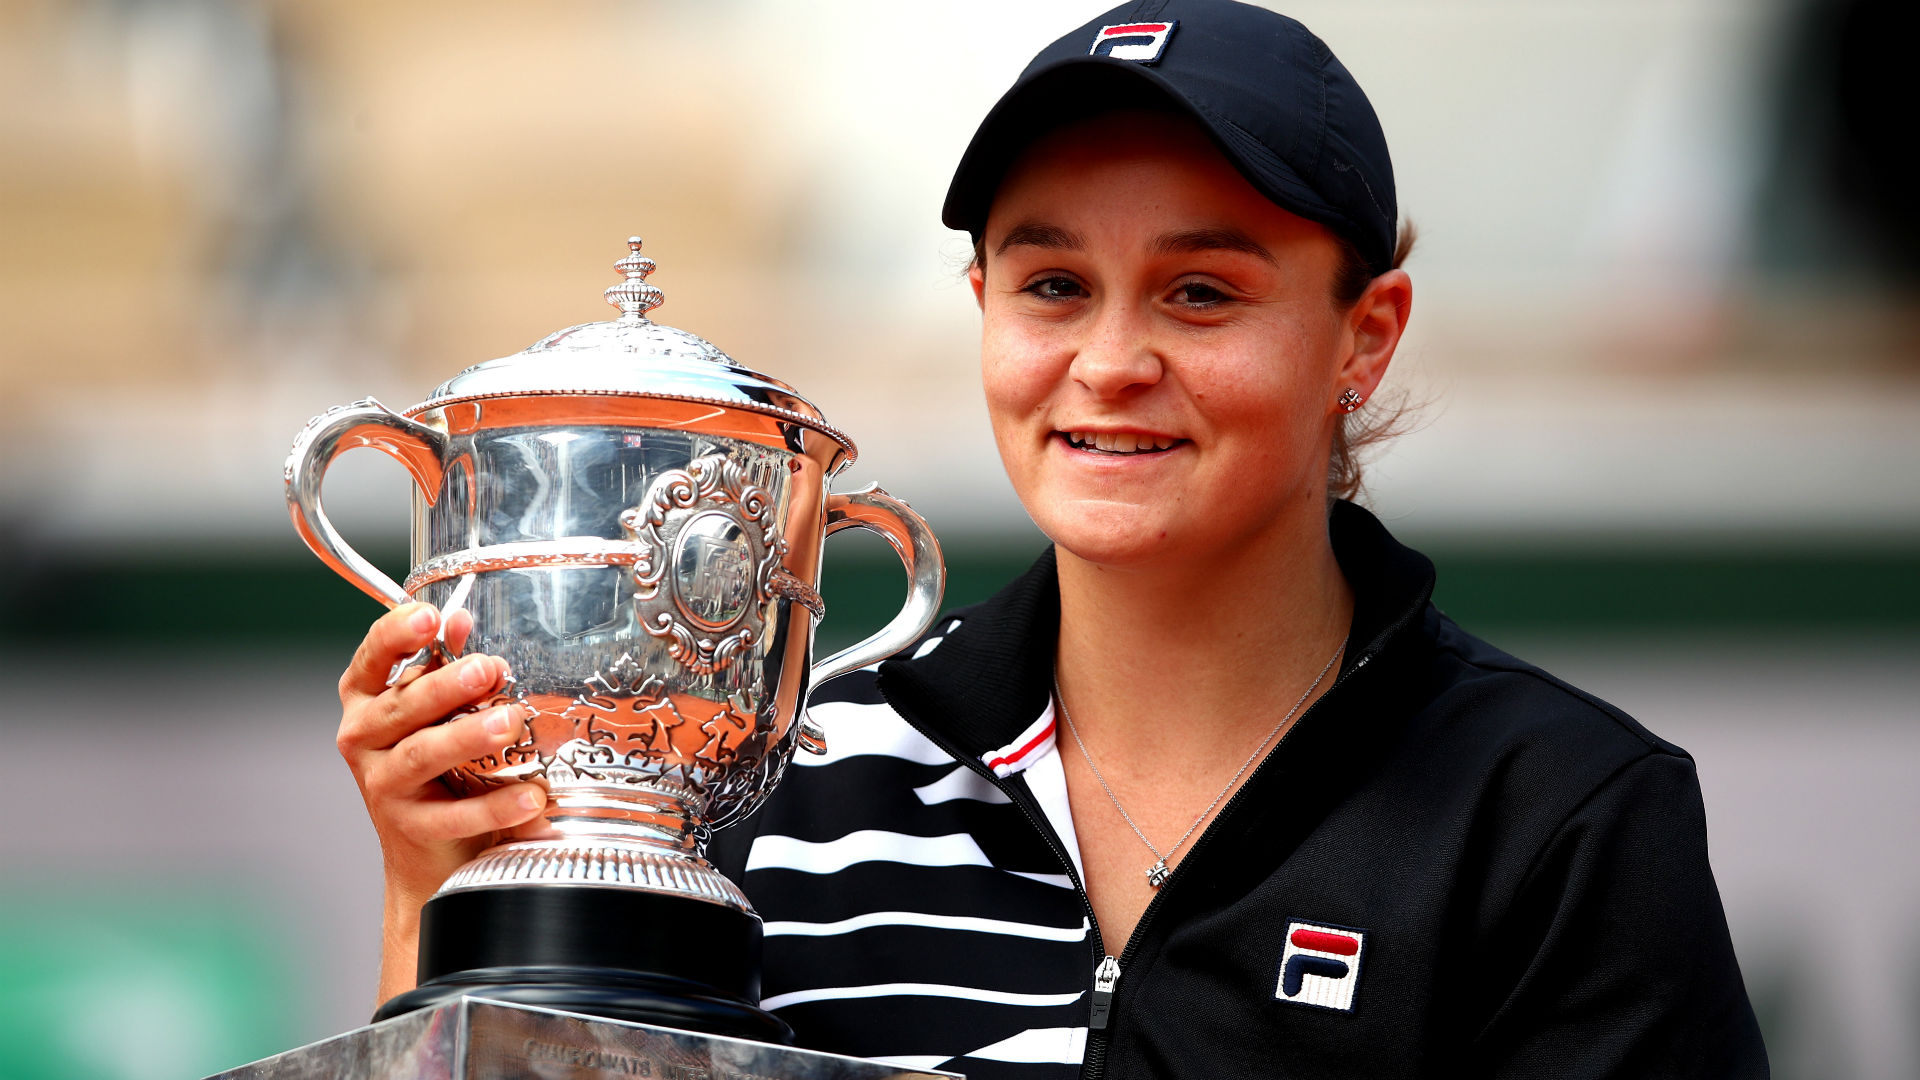 Ashleigh Barty was destined to play cricket for Australia after showing incredible natural talent, her former coach Andy Richards said.